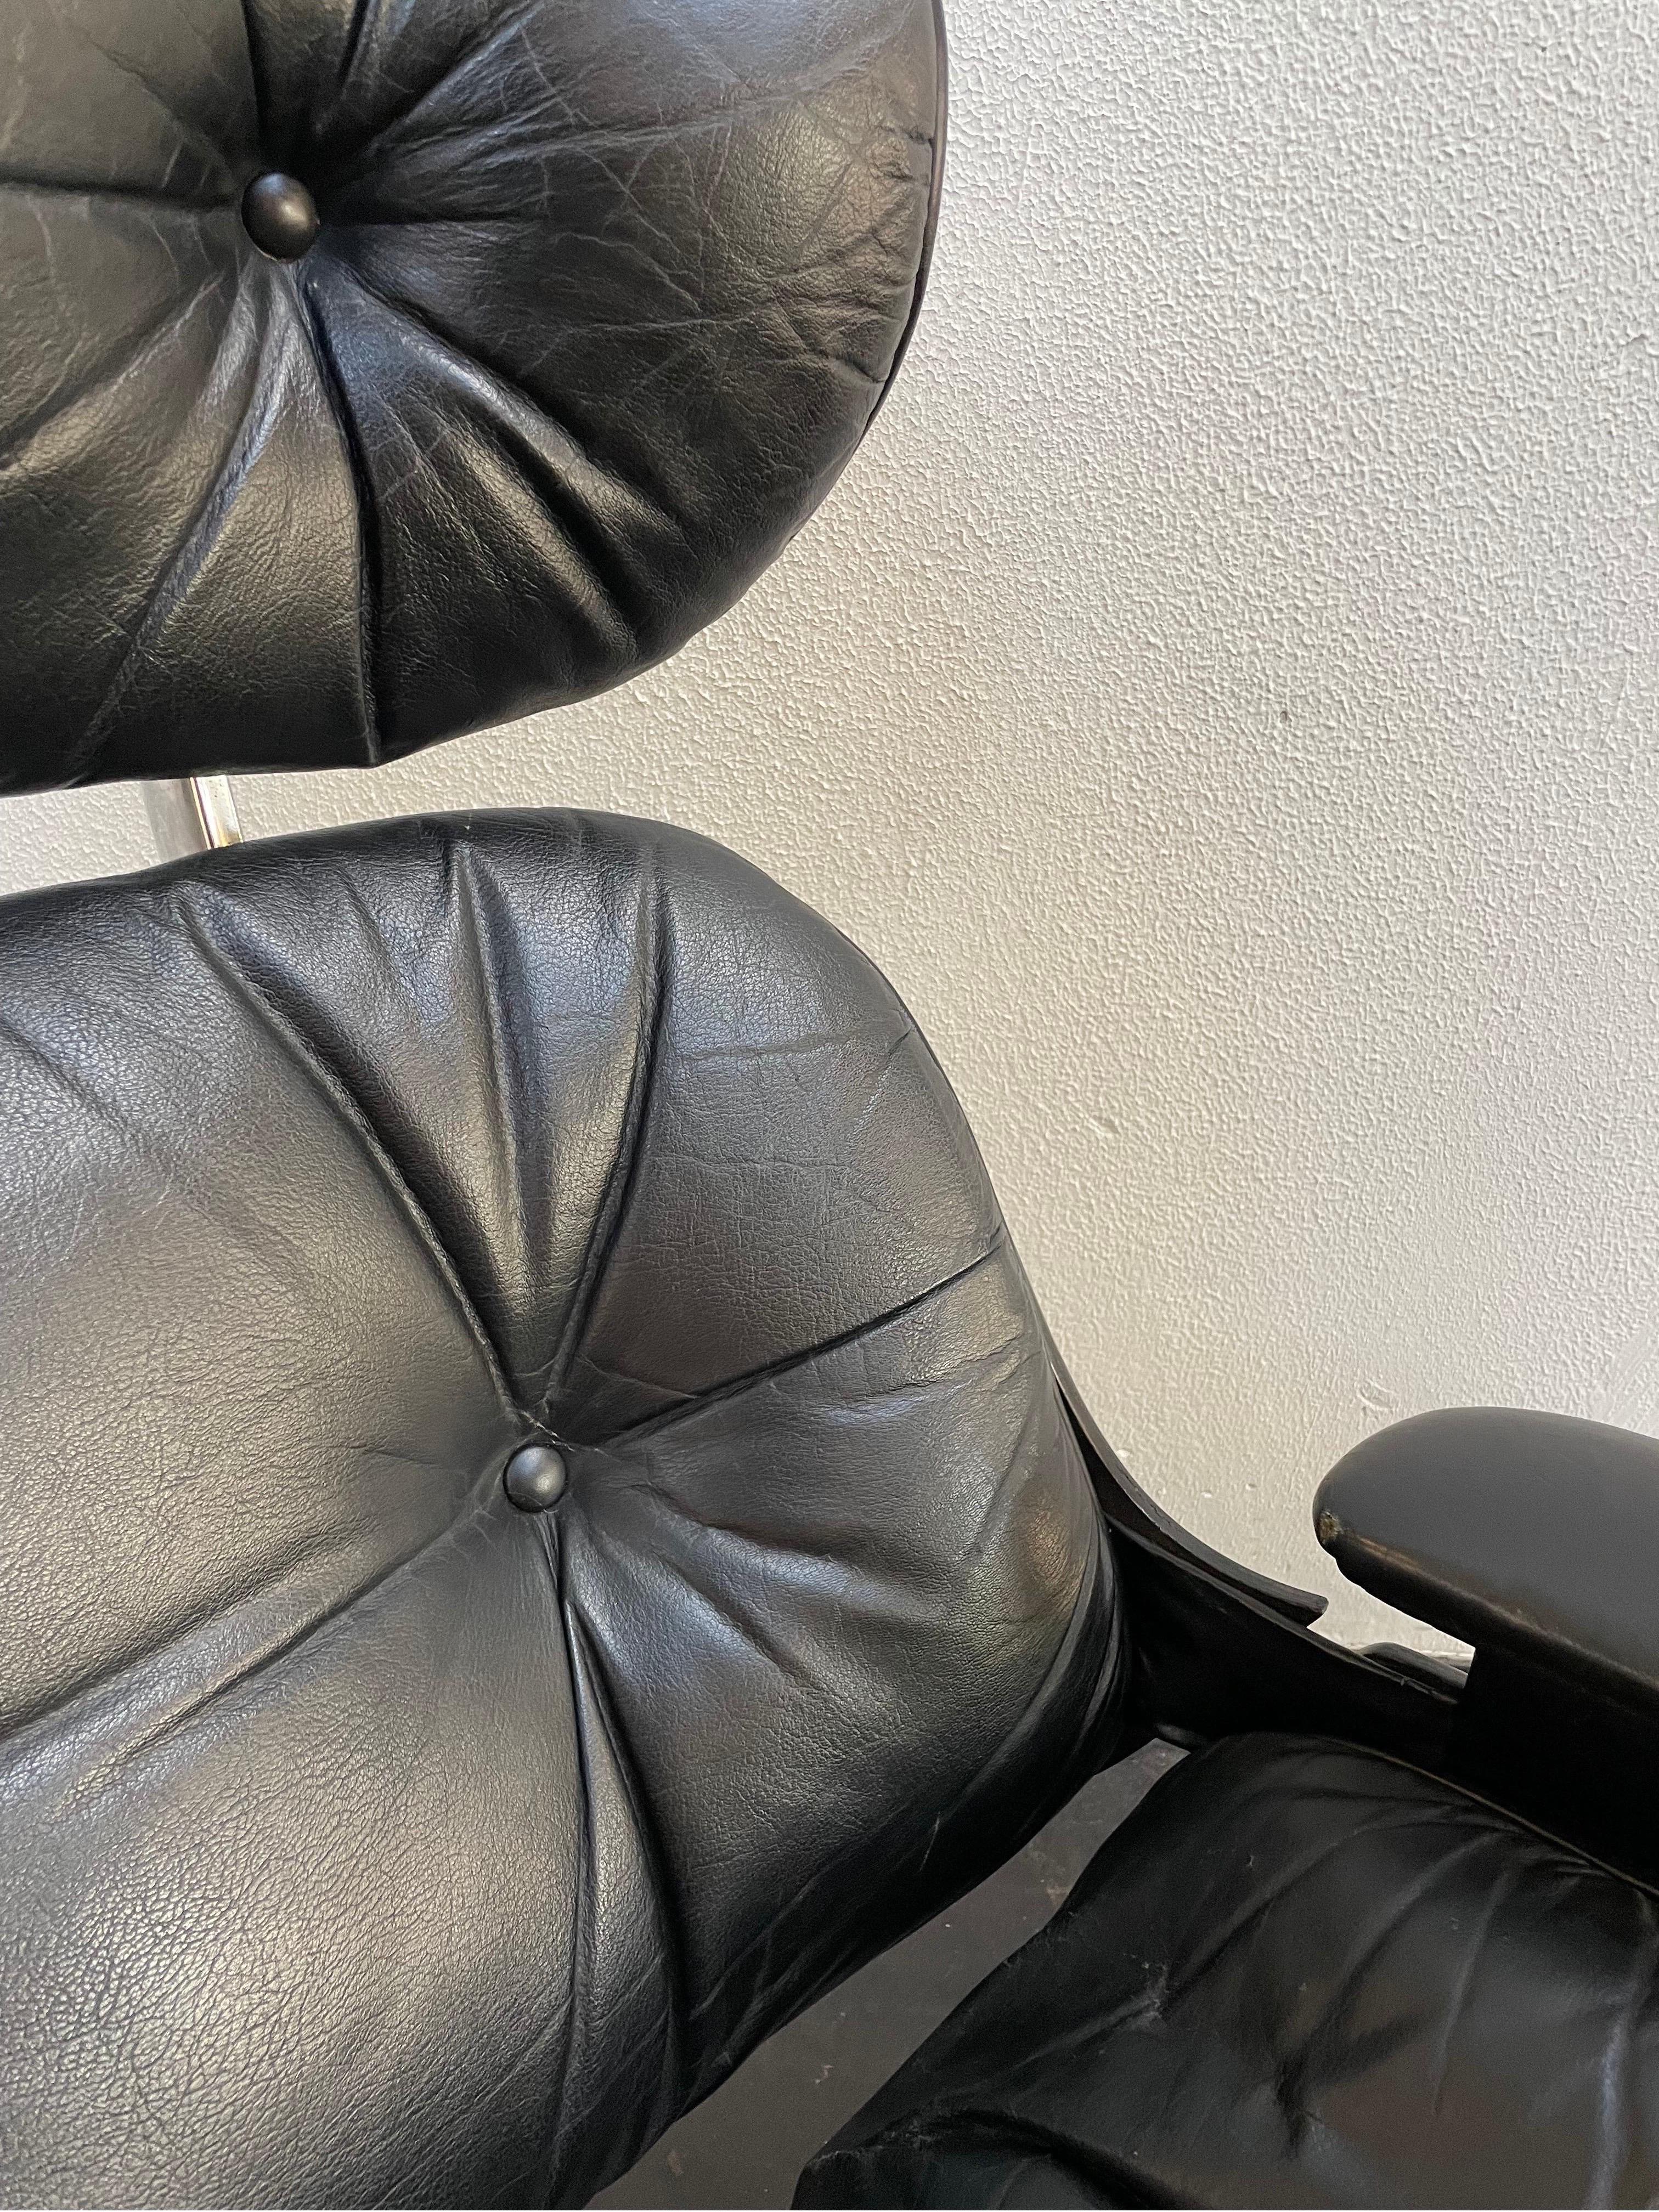 eames lounge chair knockoff